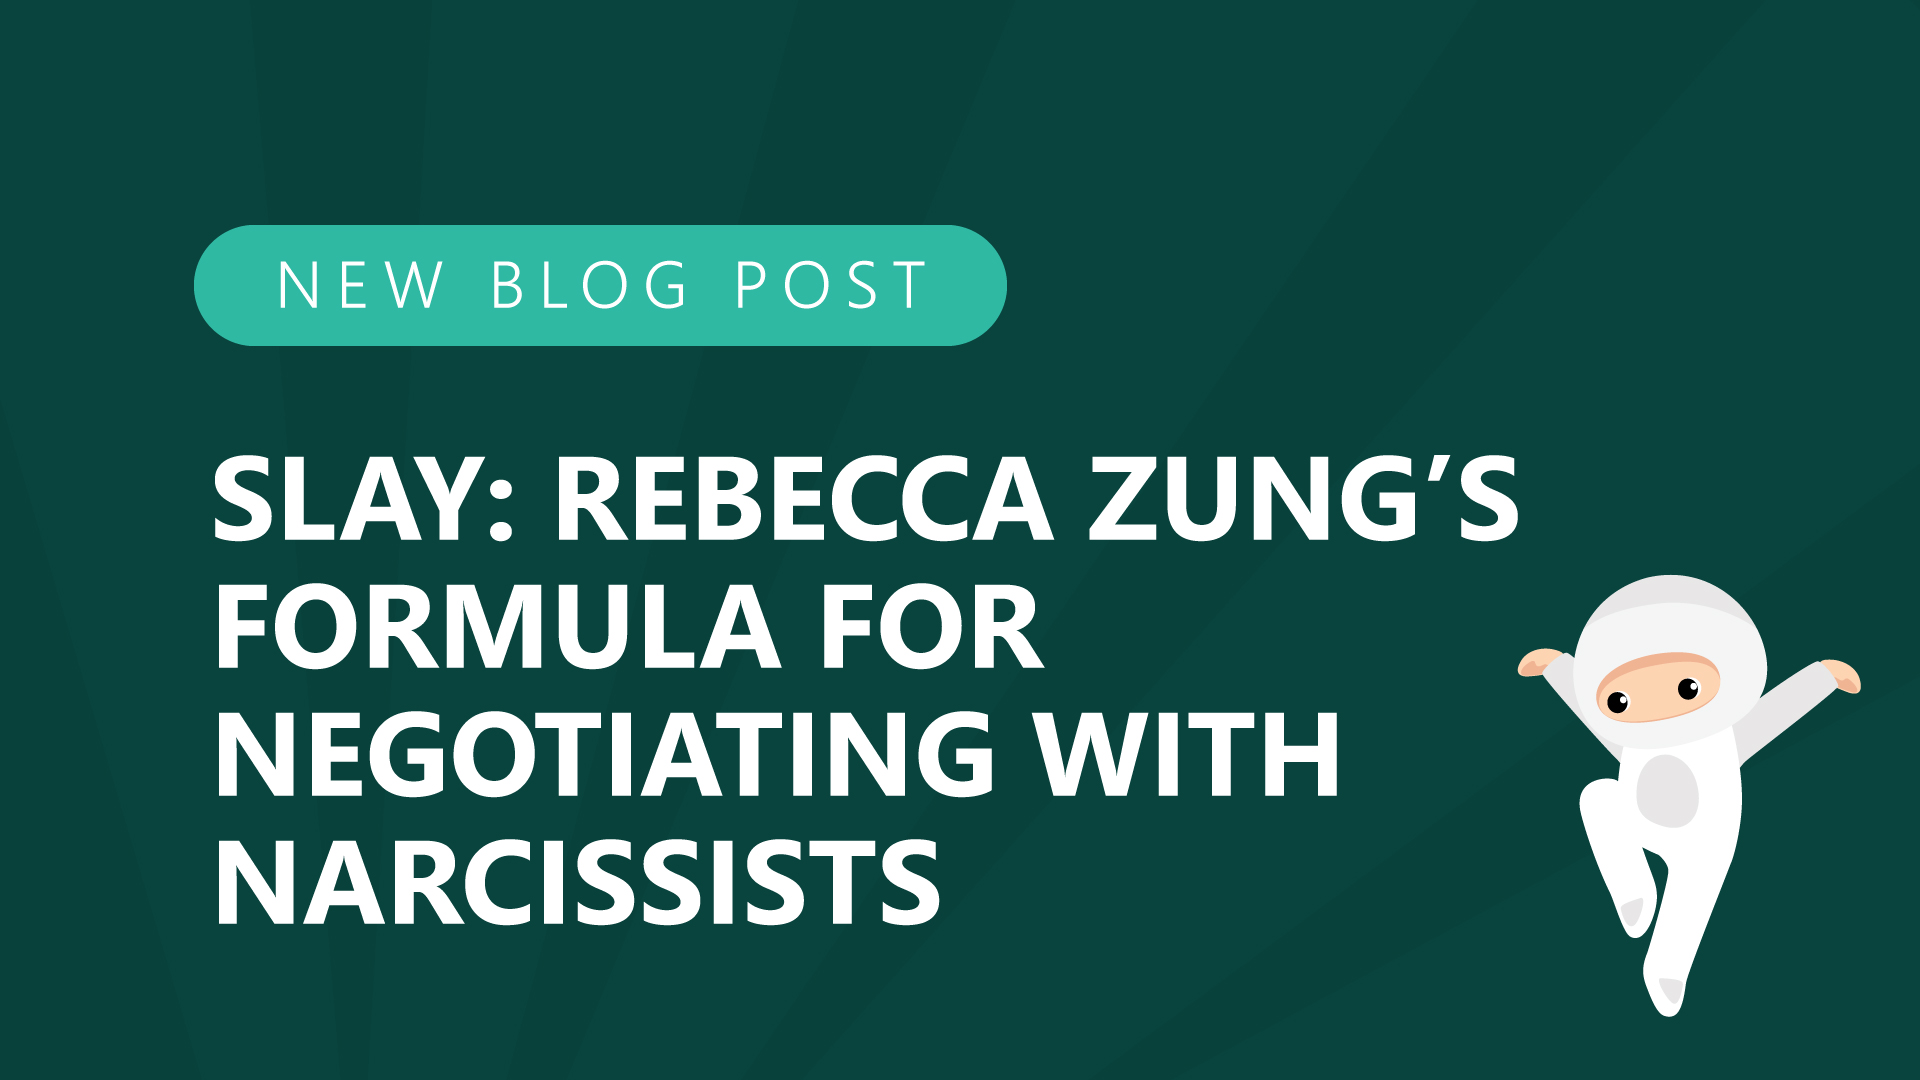 22-SLAY-Rebecca-Zungs-Formula-For-Negotiating-with-Narcissists.jpg